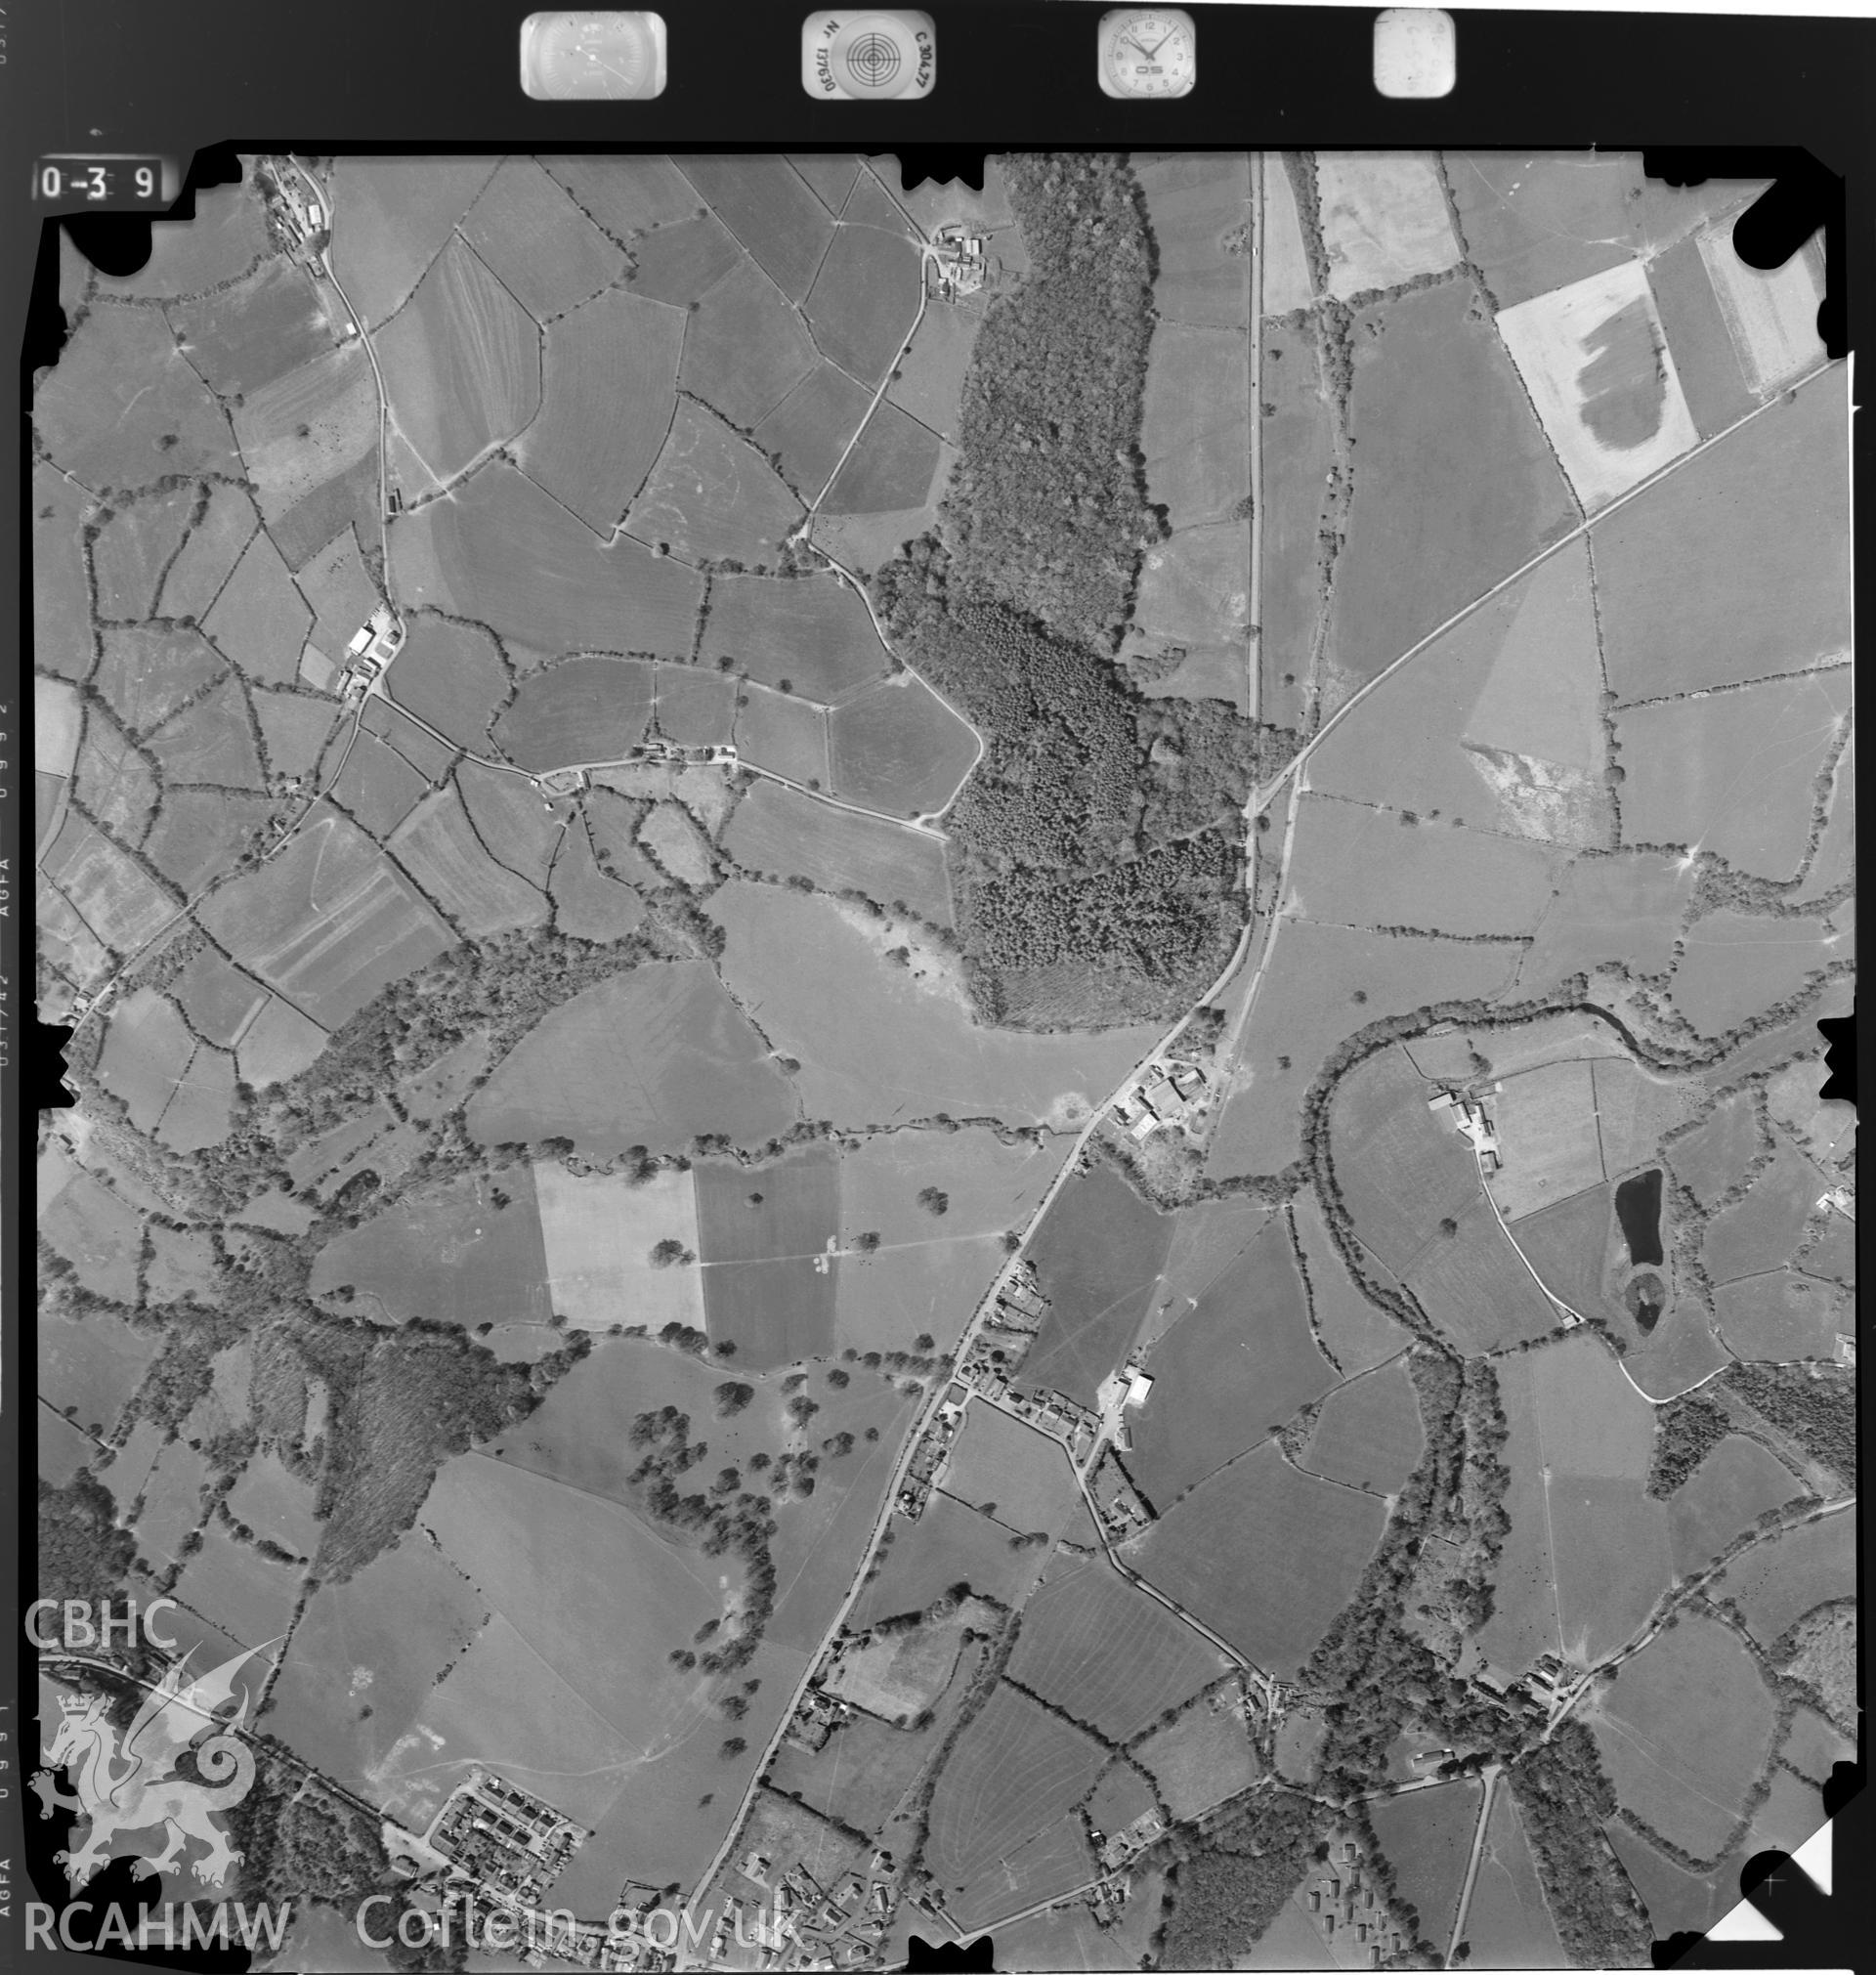 Digitized copy of an aerial photograph showing the area to the north-west of Ciliau Aeron, taken by Ordnance Survey, 1996